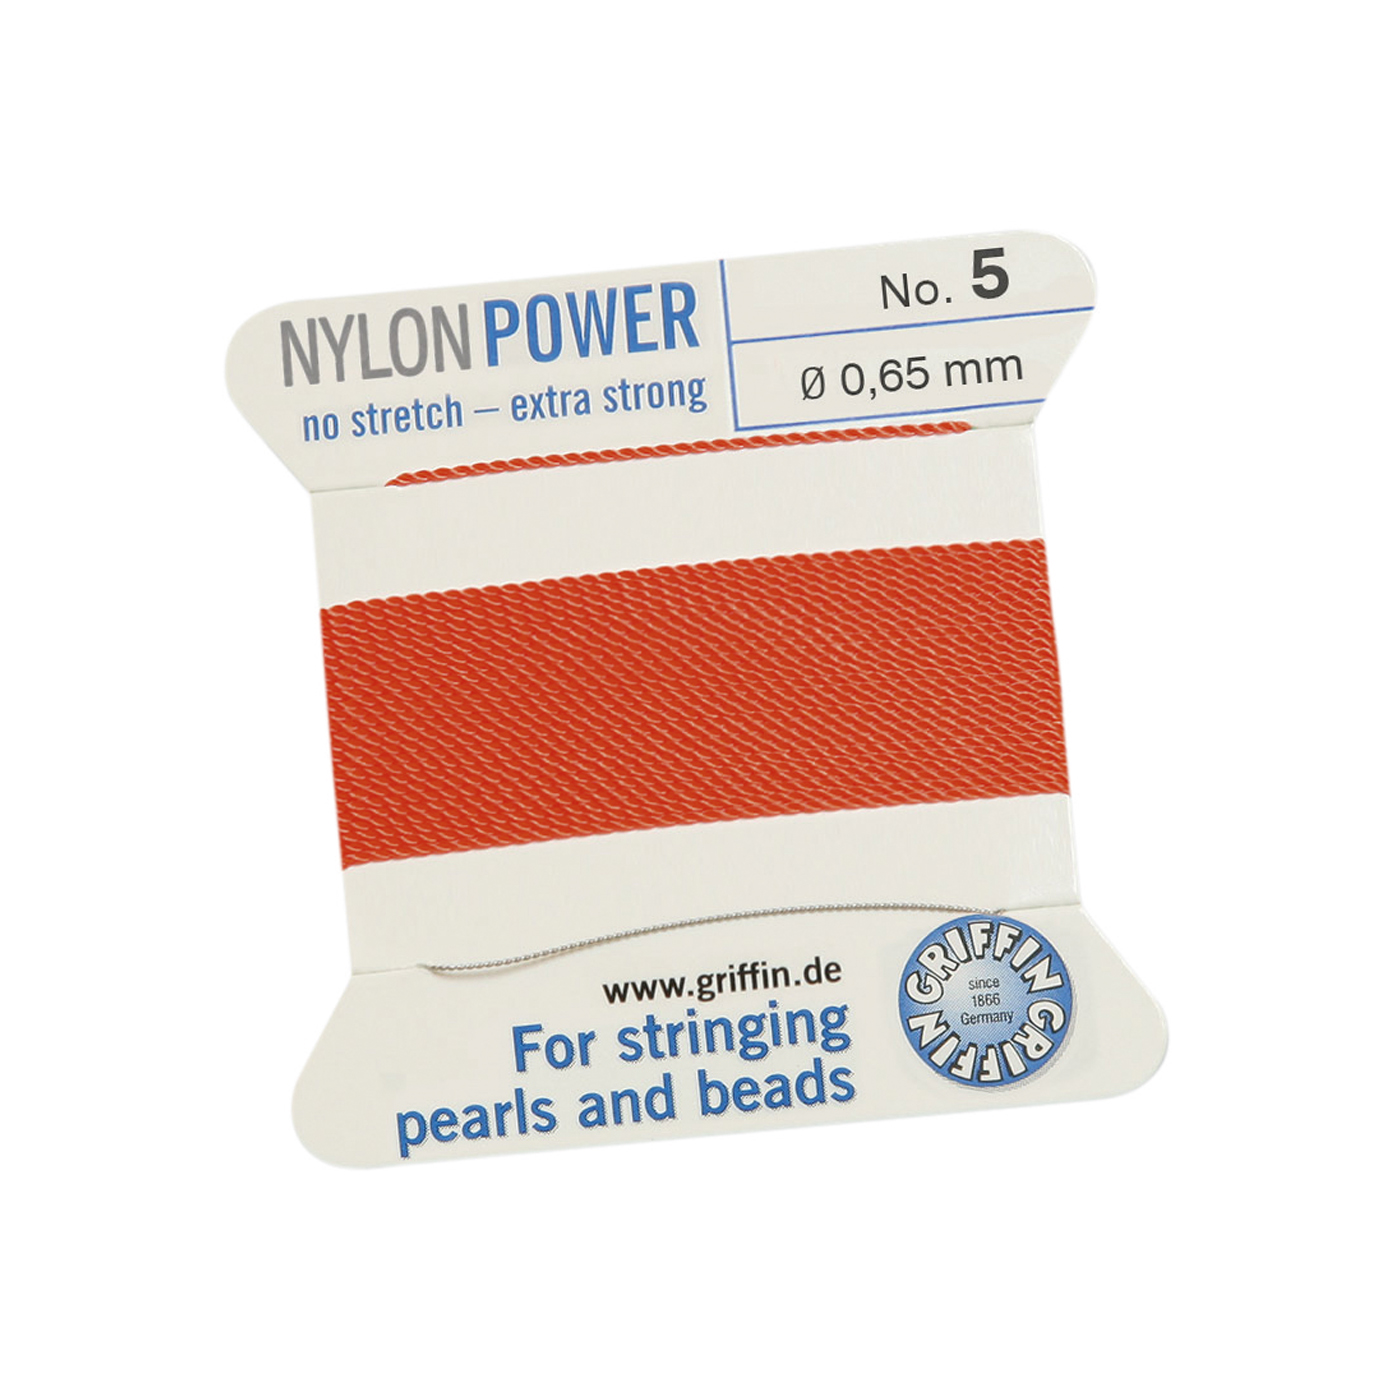 Bead Cord NylonPower, Coral Red, No. 5 - 2 m